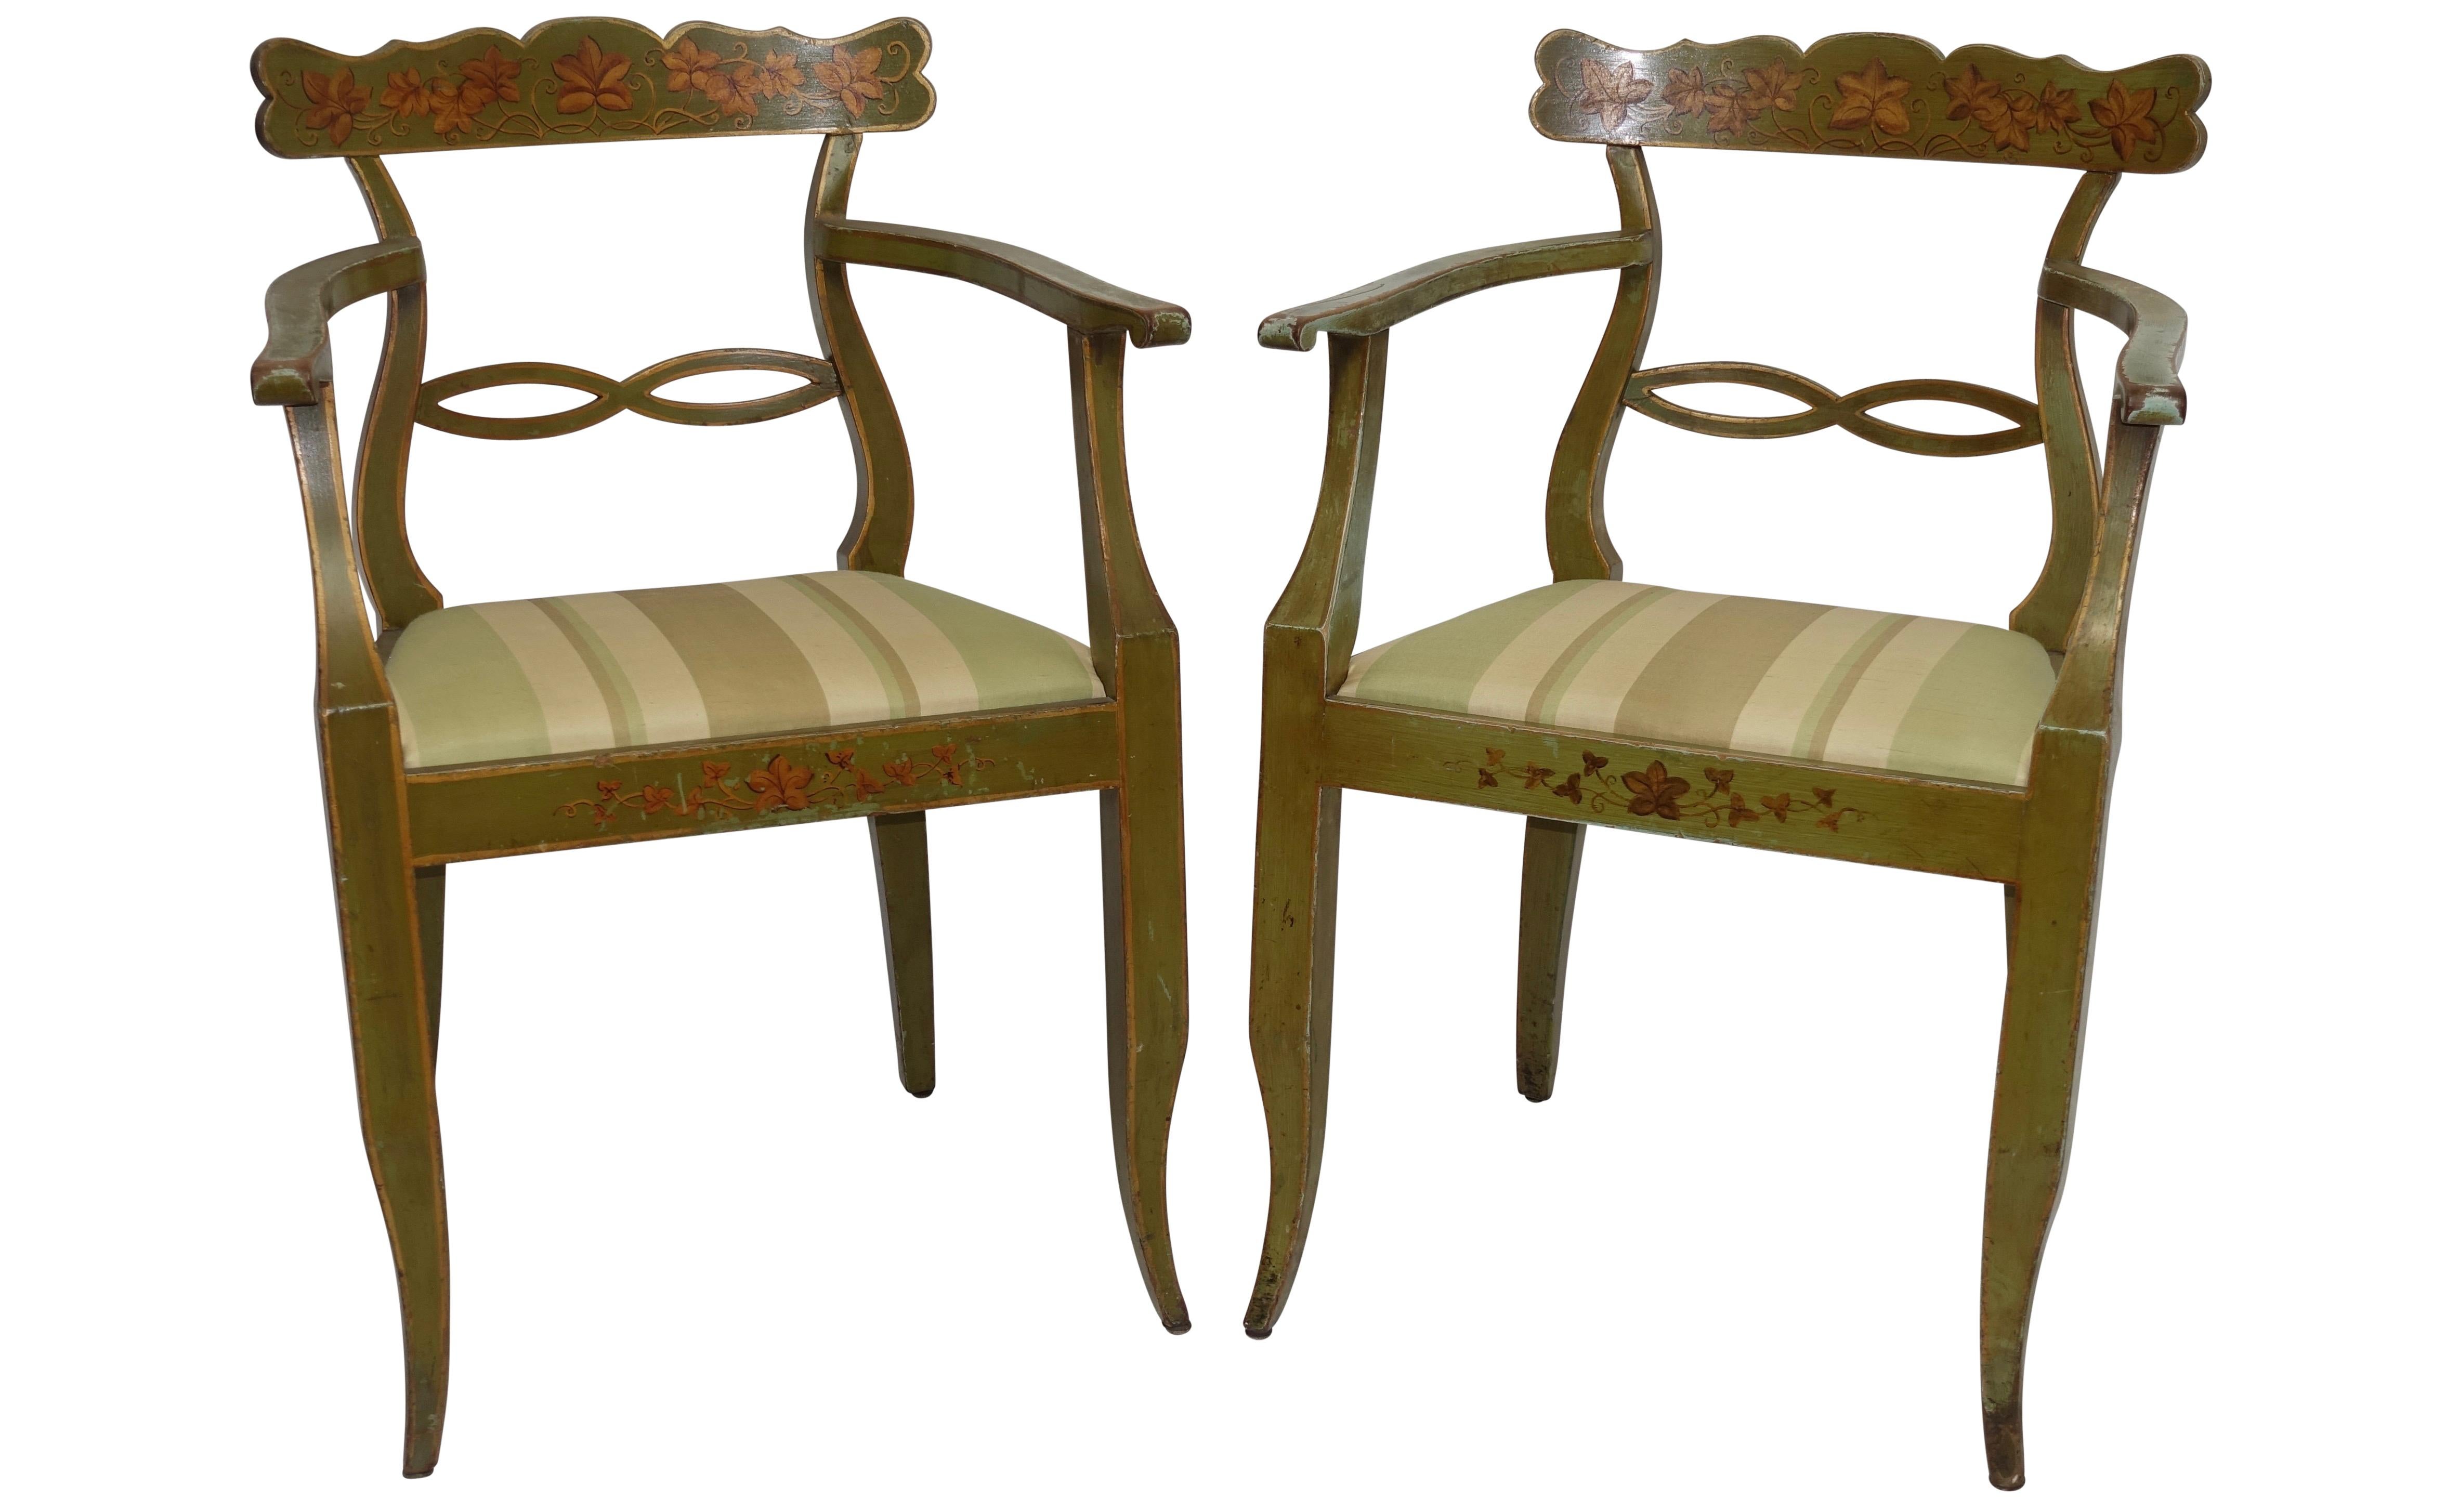 Country Four Green Painted Armchairs with Trailing Ivy, Northern European, 19th Century For Sale